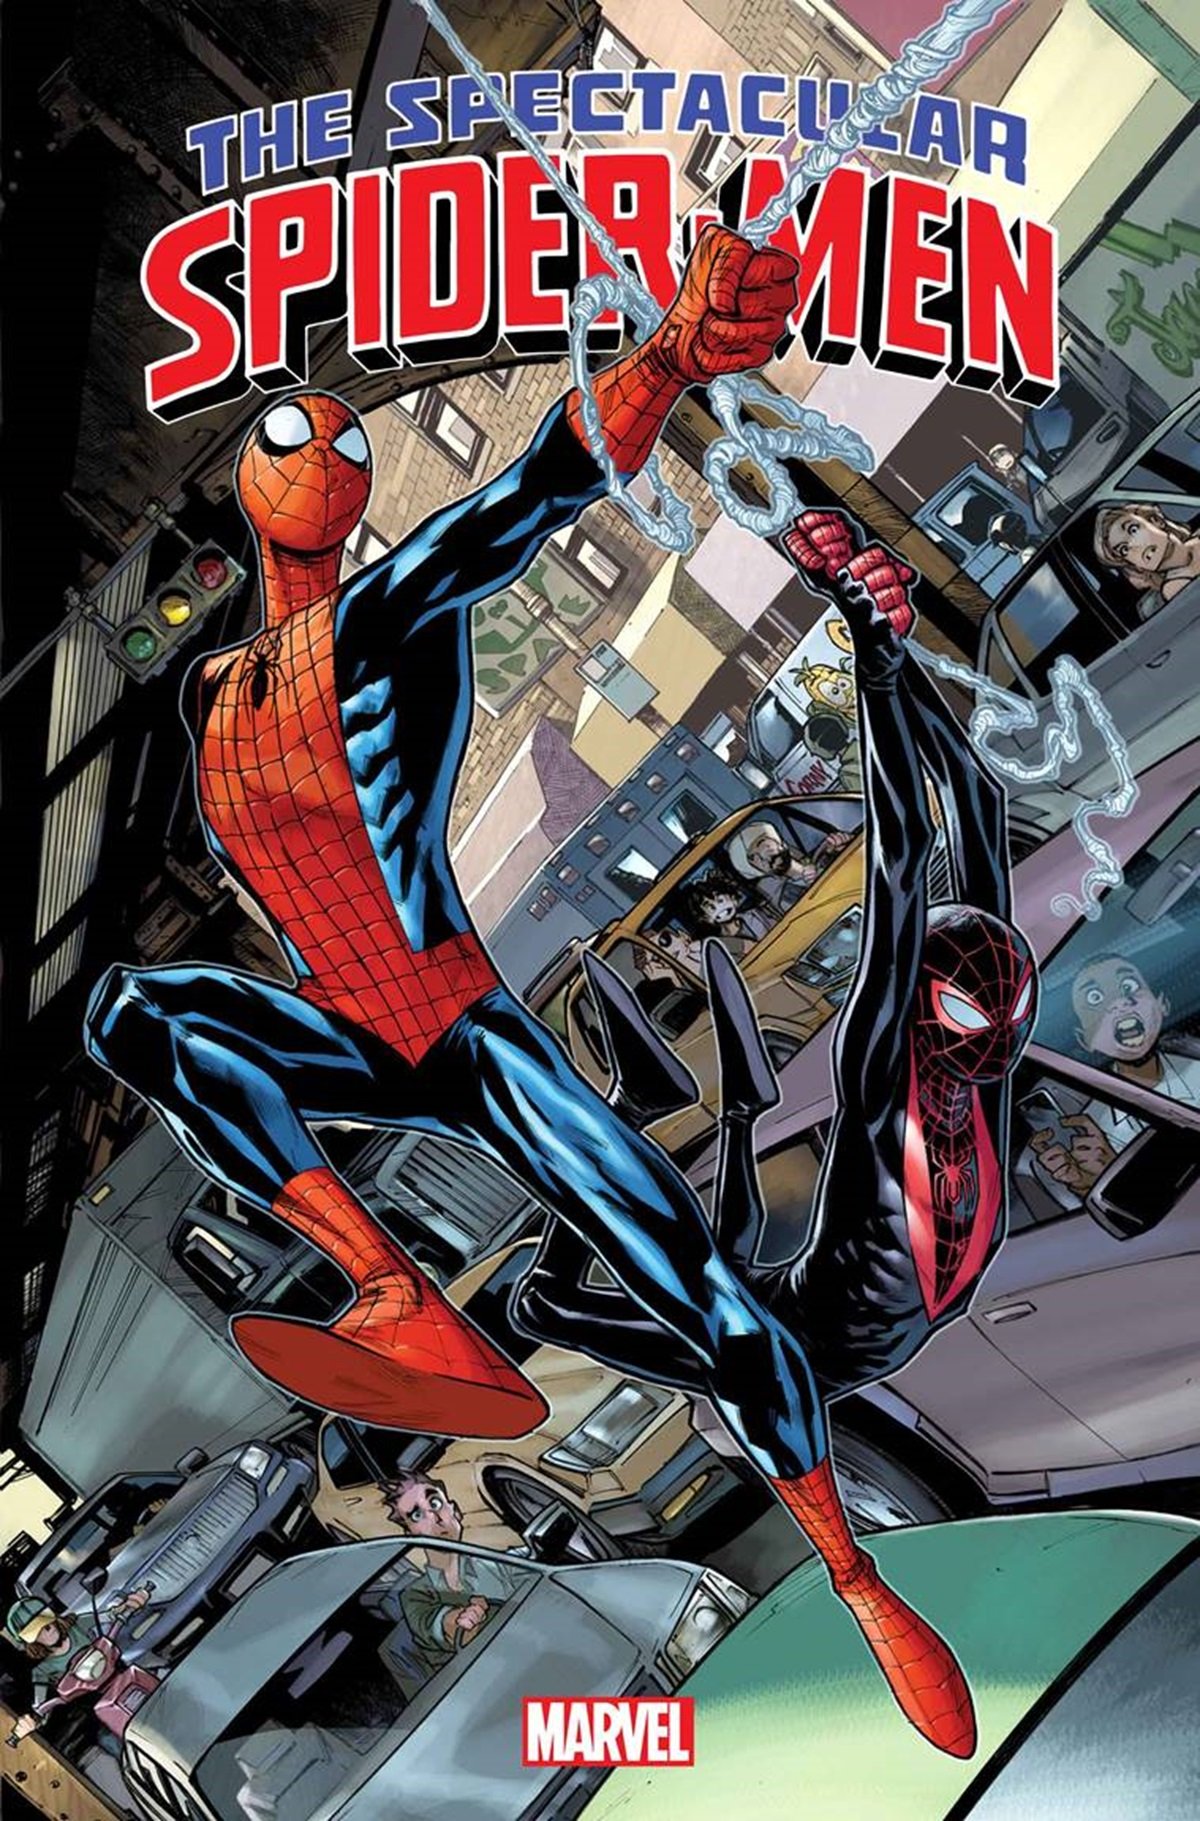 The cover to Marvel Comics' Spectacular Spider-Men by Humberto Ramos.